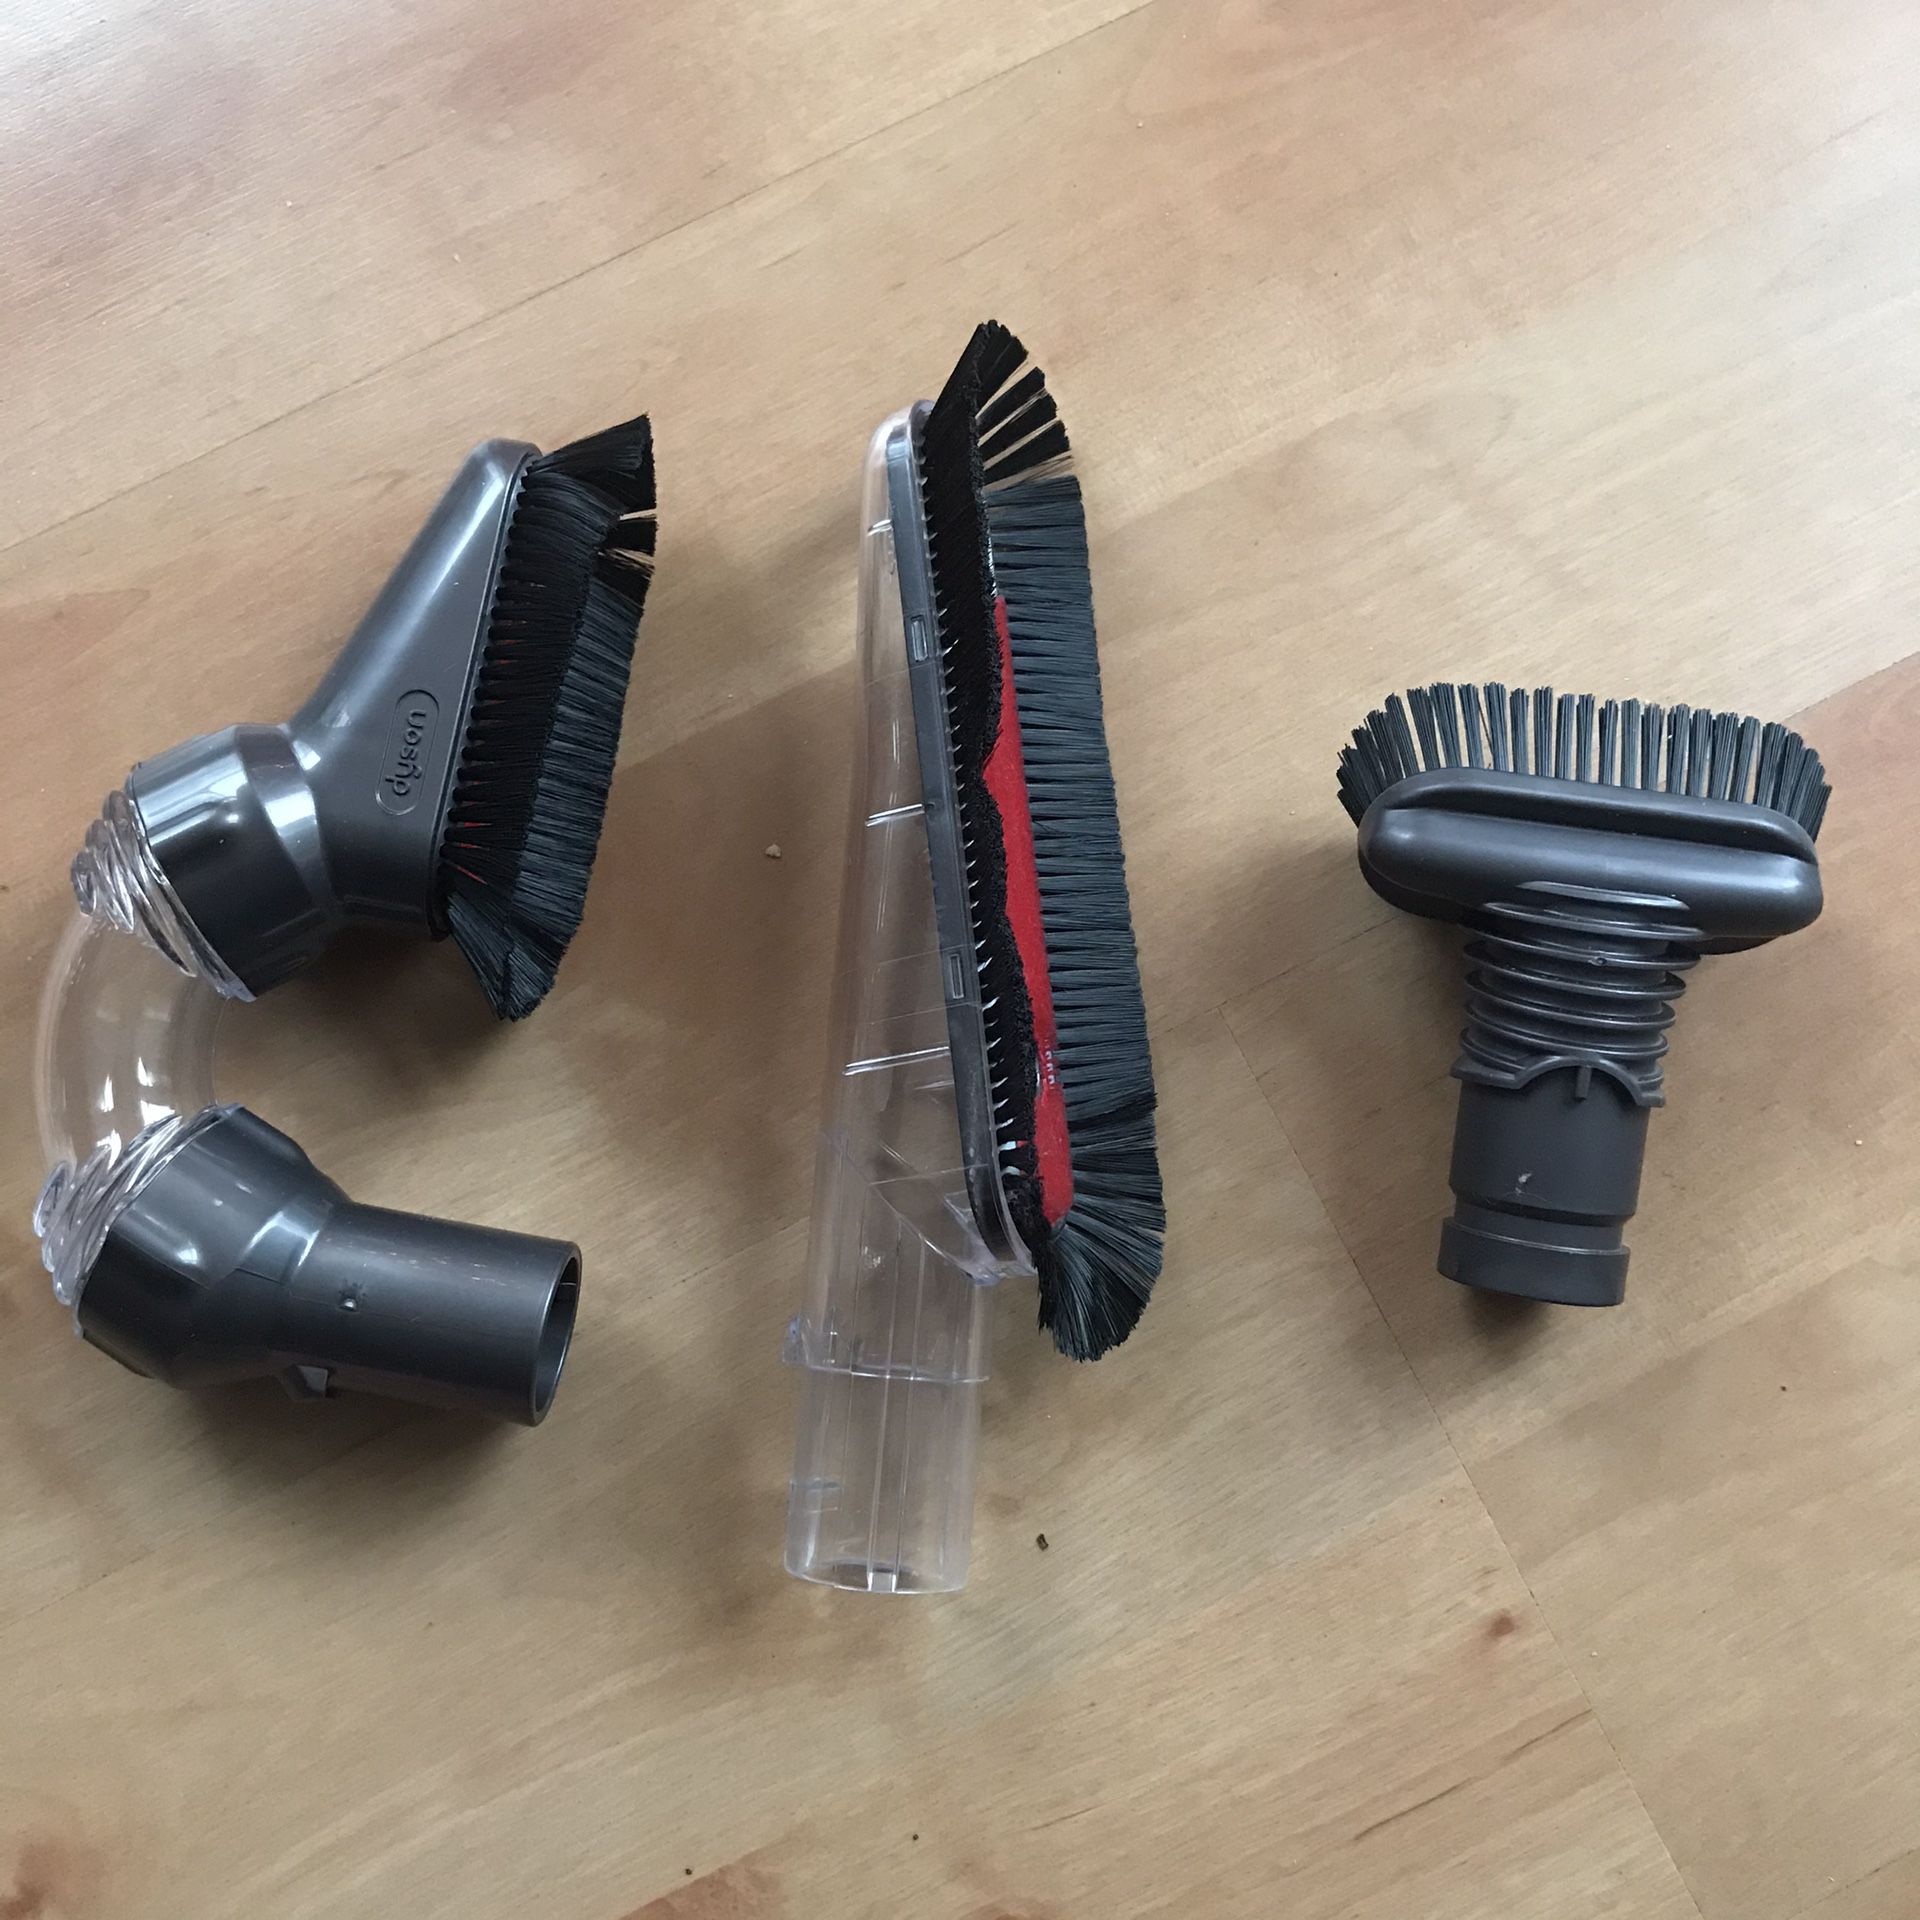 Brand New Dyson Vacuum Cleaner Tools Genuine Dyson Tools For Machine Upright Vacuum Tools